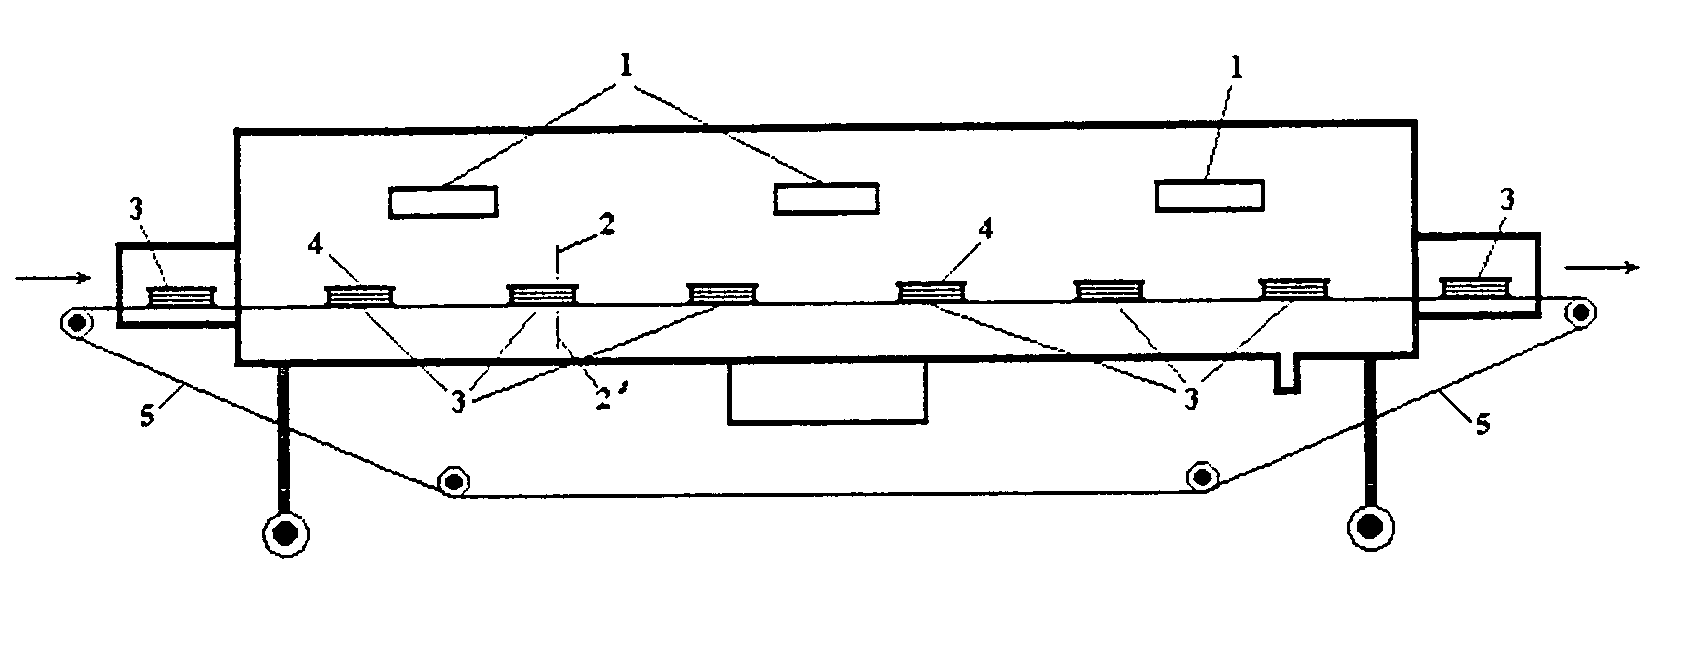 Method of drying book and similar paper-based materials